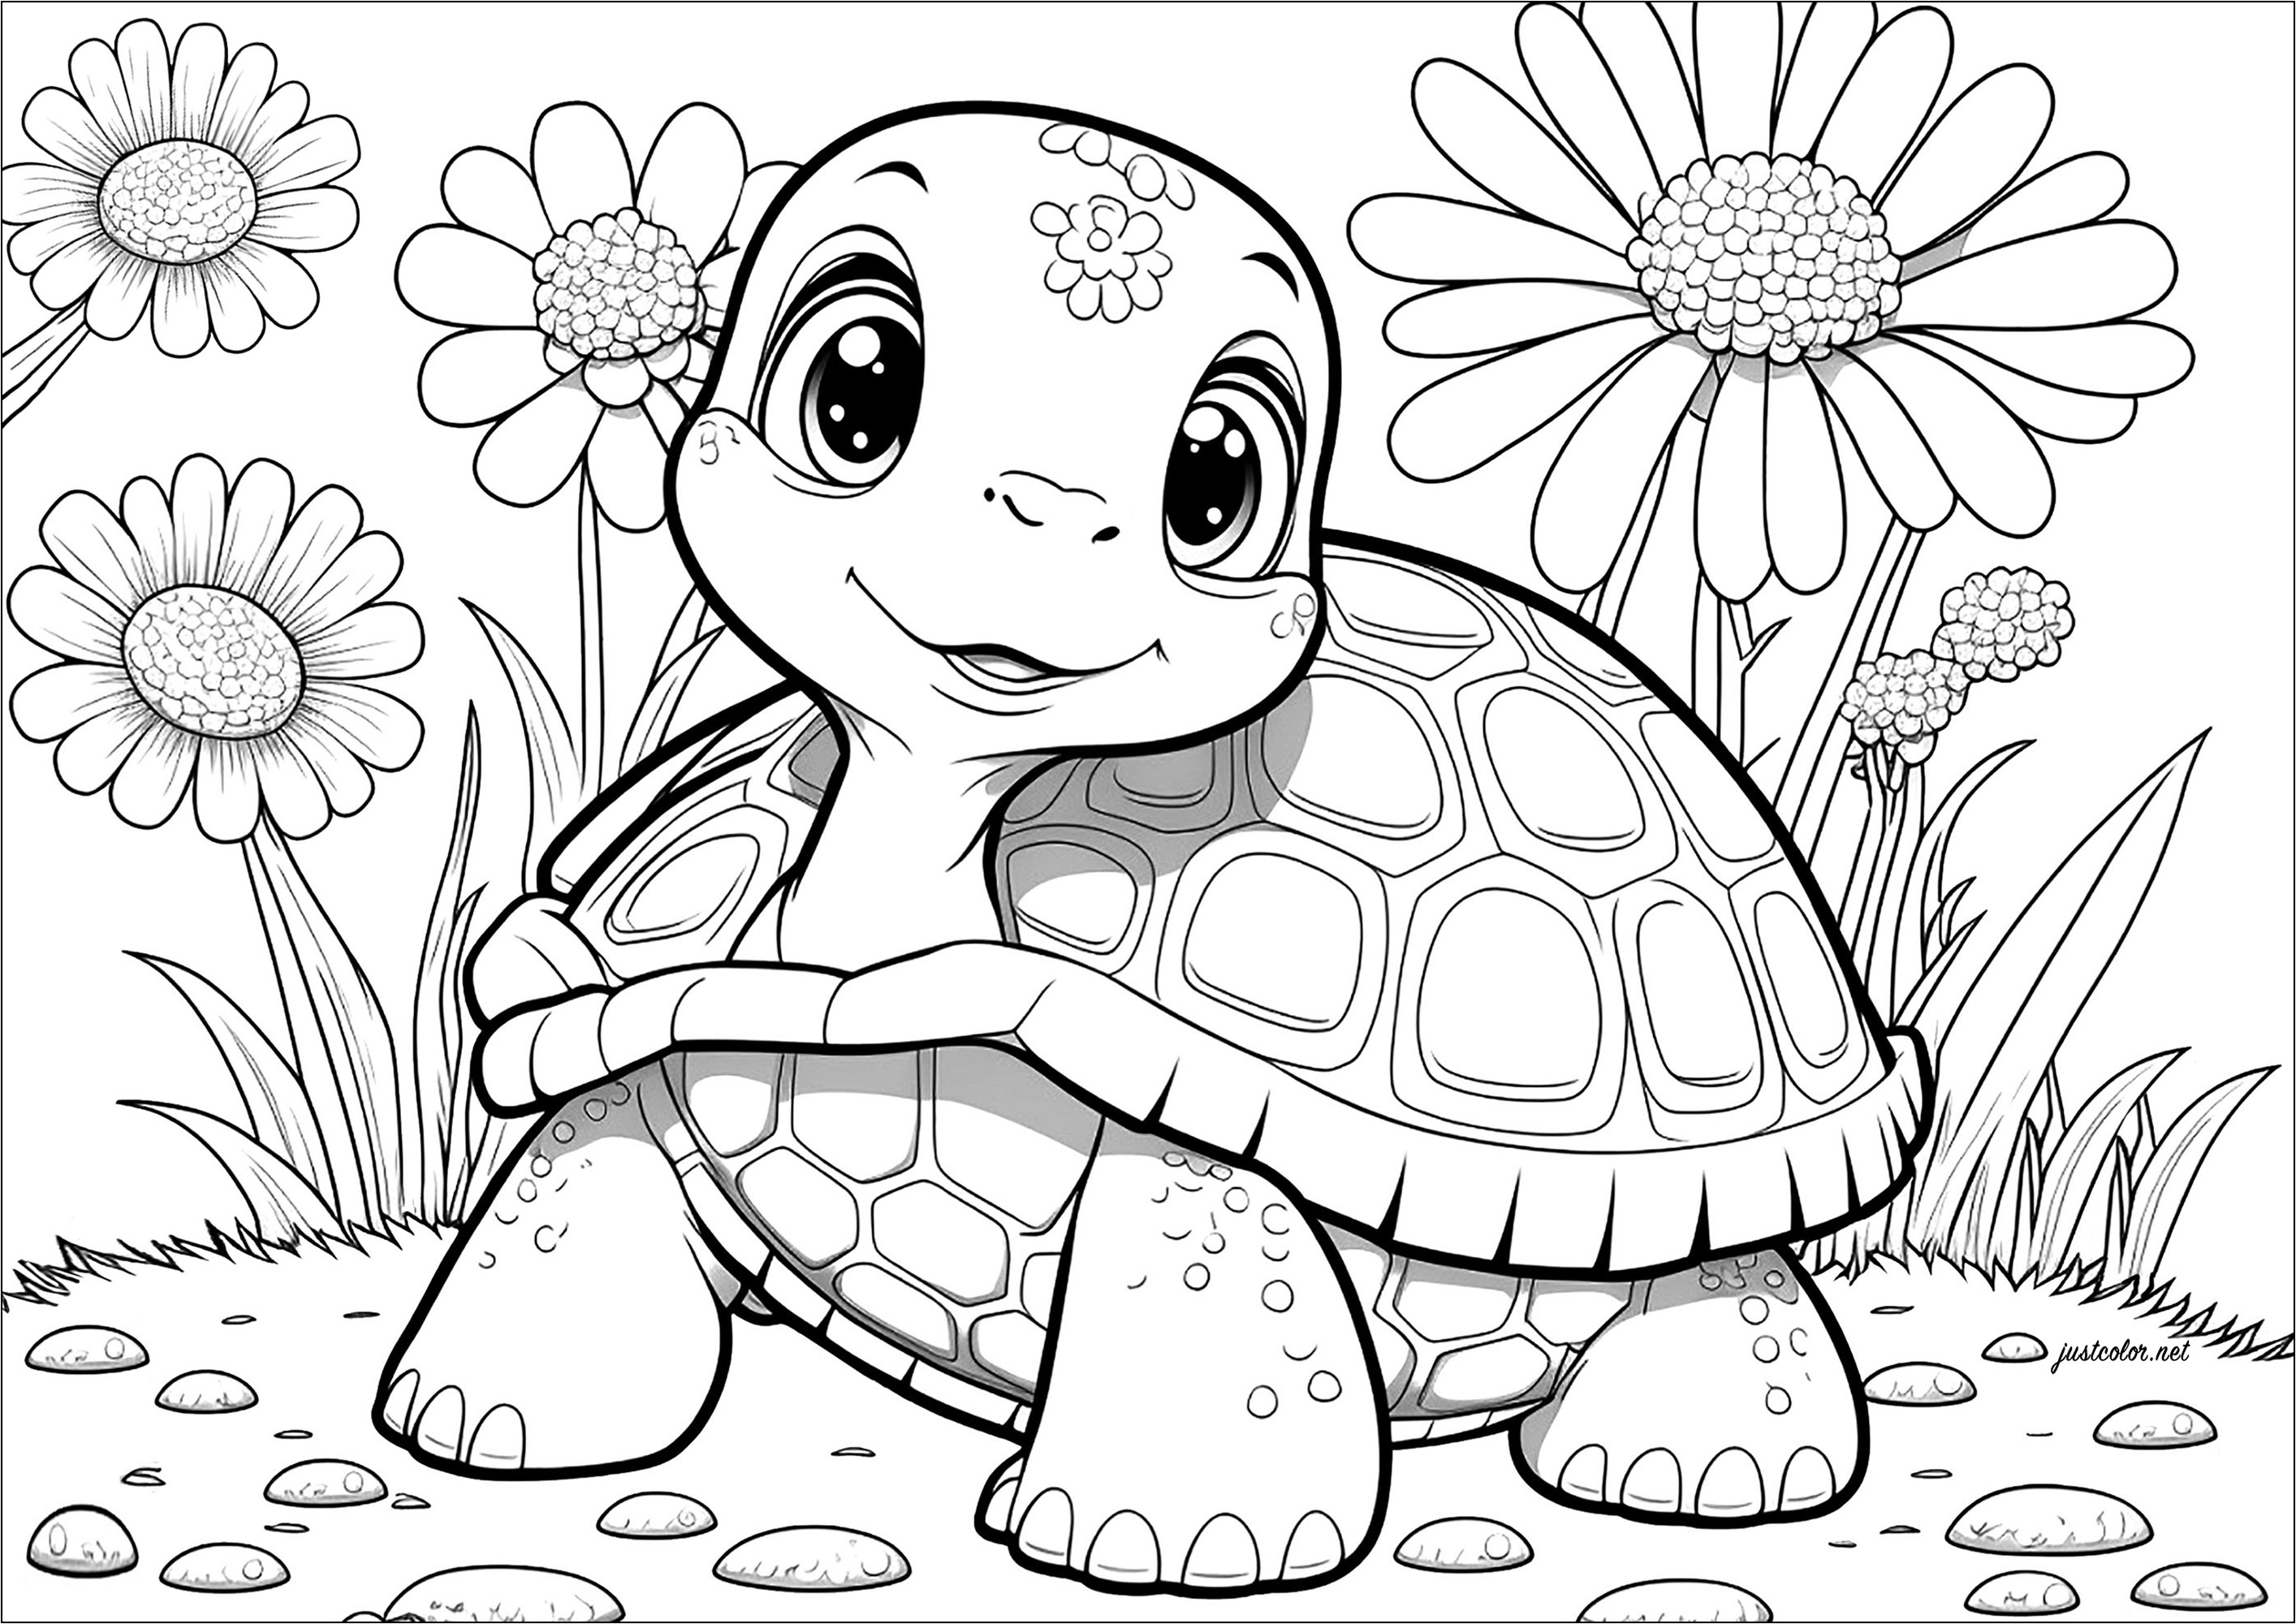 Color this young and cute tortoise, and all the flowers surrounding it. See the tortoise's determination as it slowly but surely makes its way to its goal.